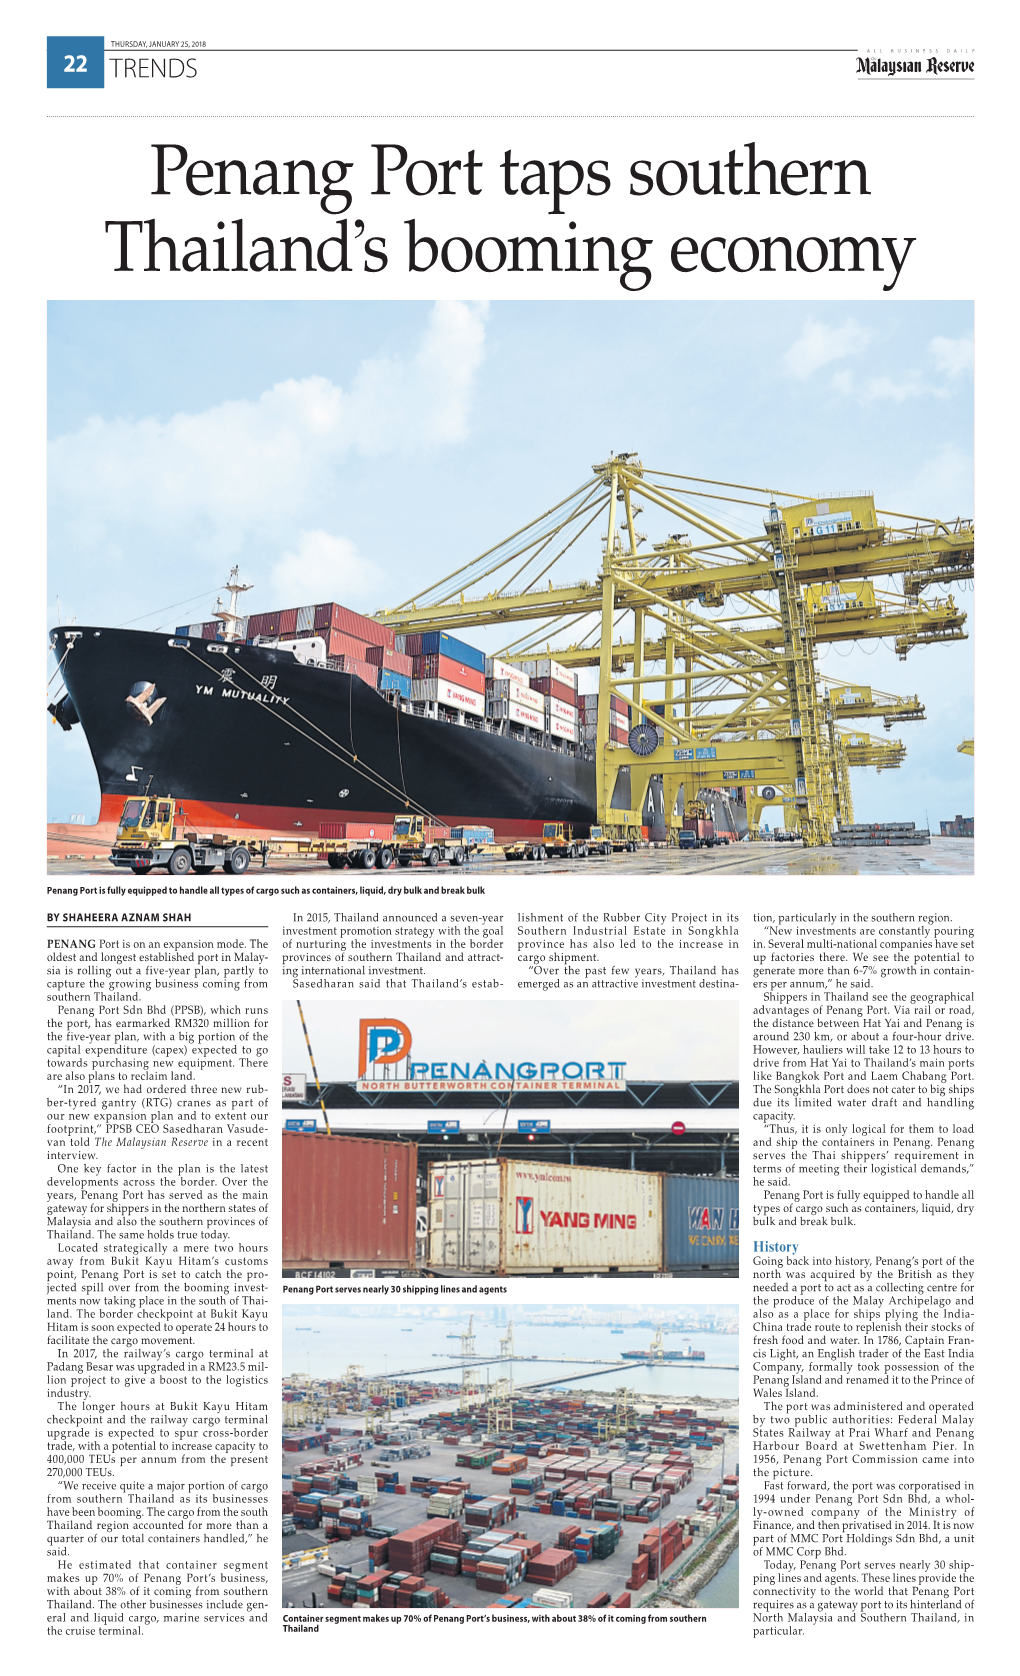 Penang Port Taps Southern Thailand's Booming Economy